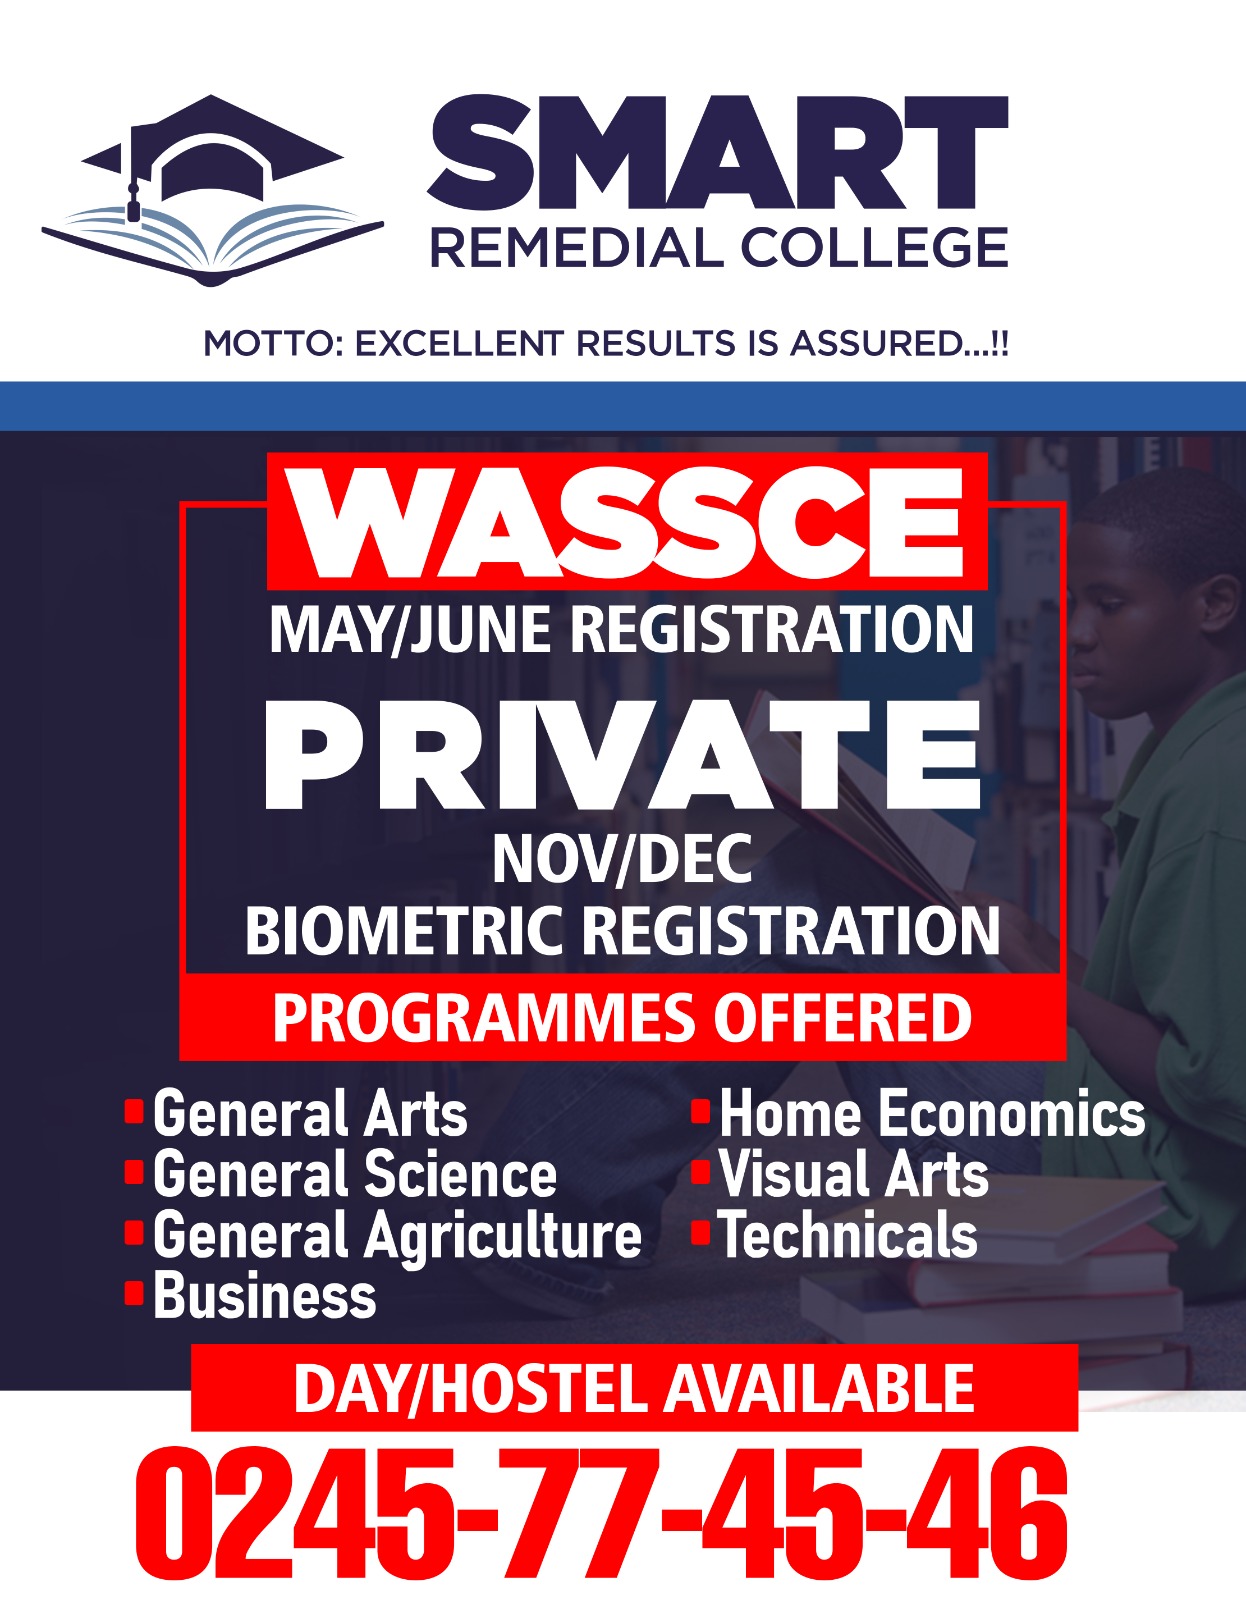 Pass WASSCE (School and Private) in 1 of these 3 top remedial schools